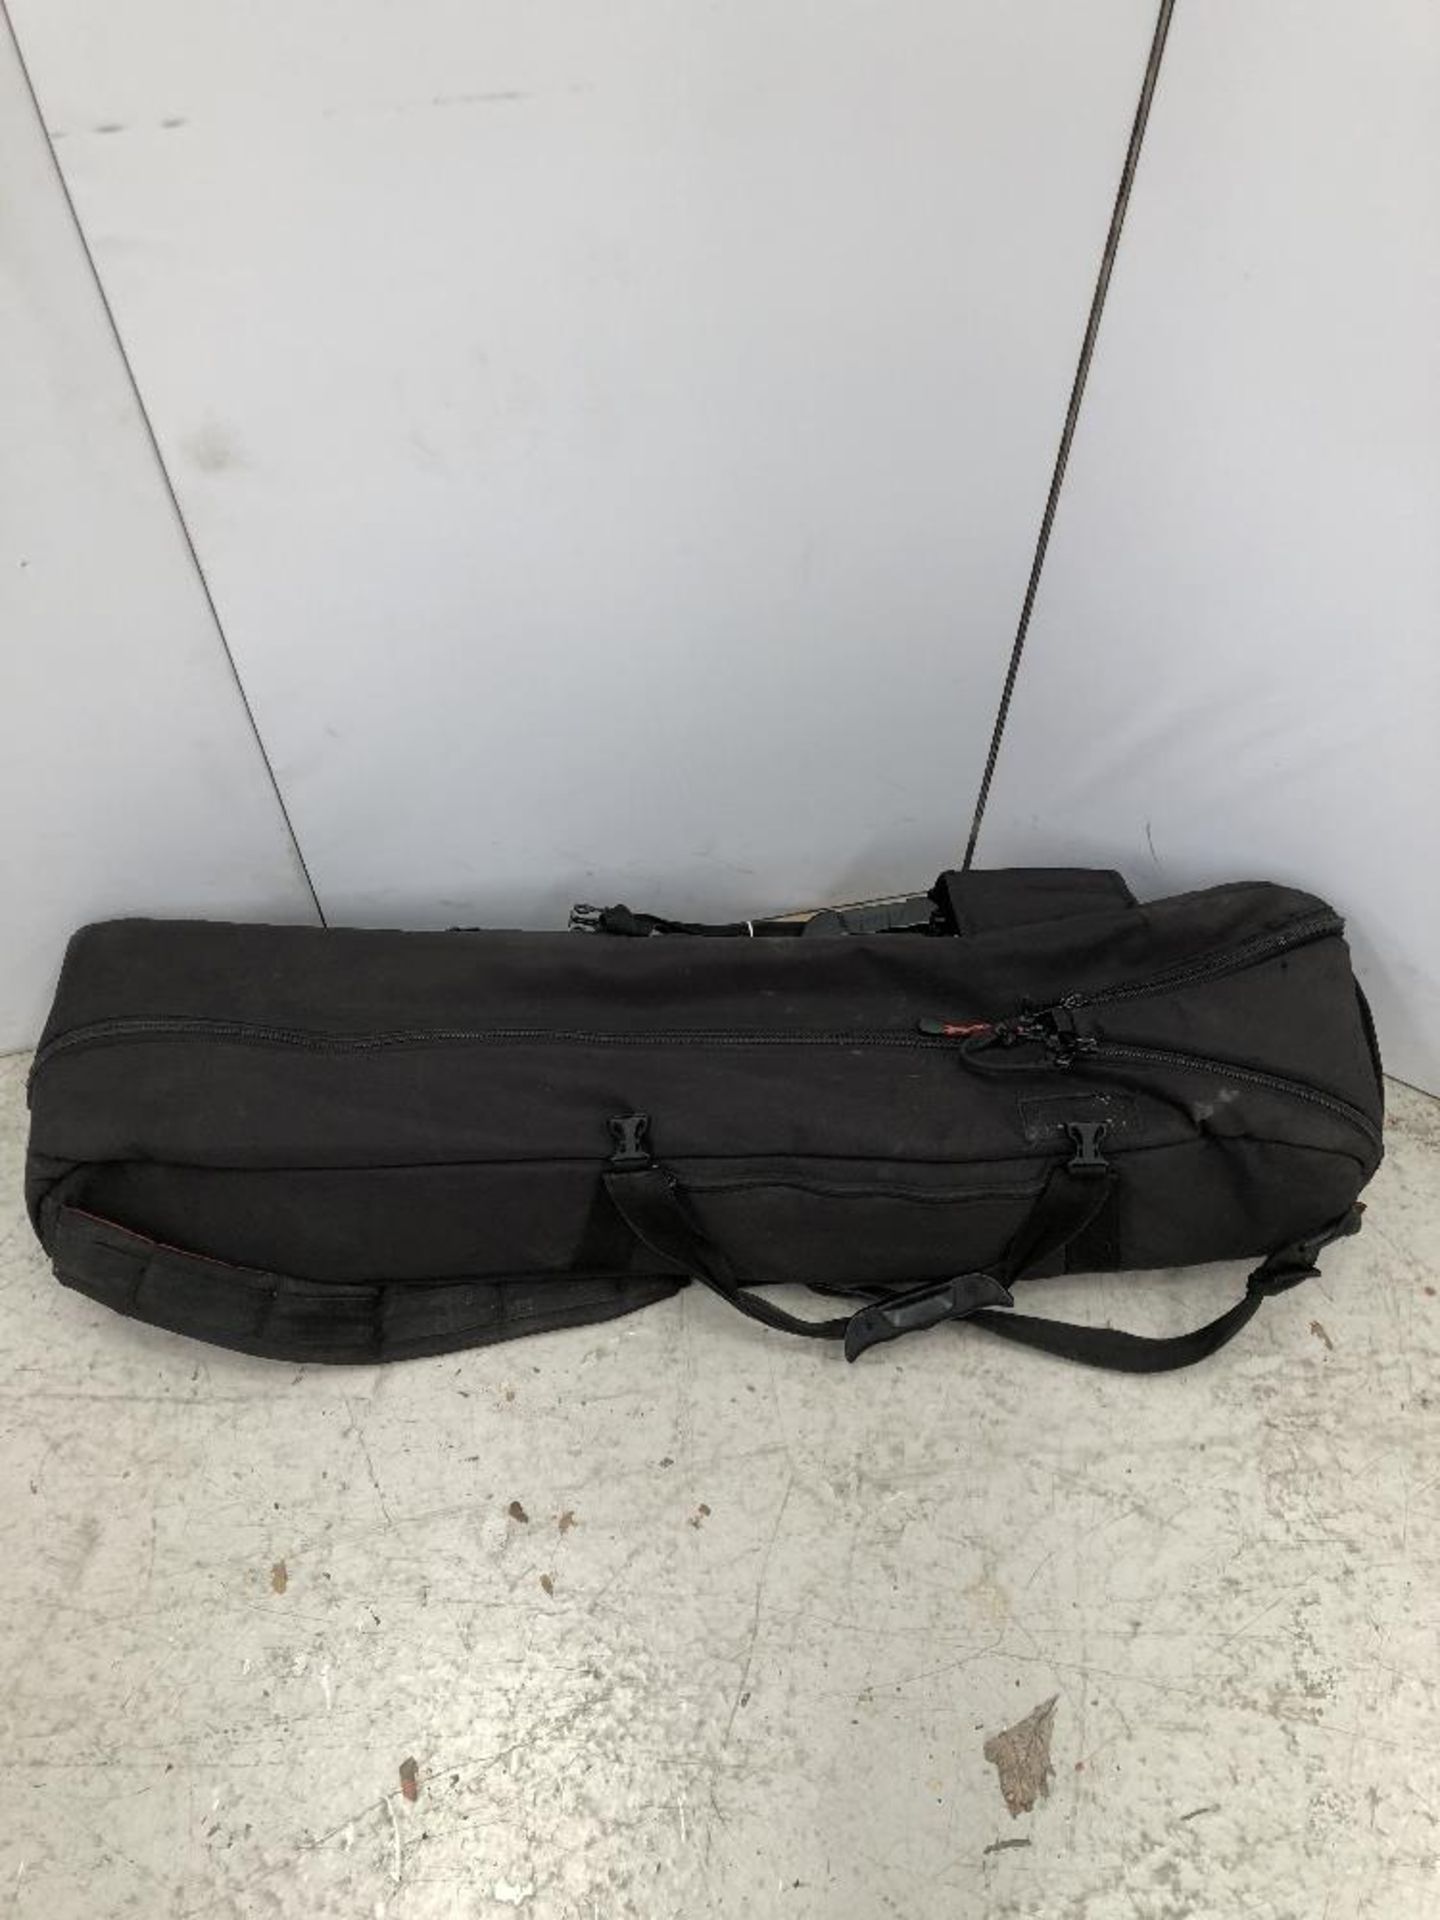 Miller Arrow 25 Telescopic Tripod With Fluid Head And Carry Bag - Image 6 of 6